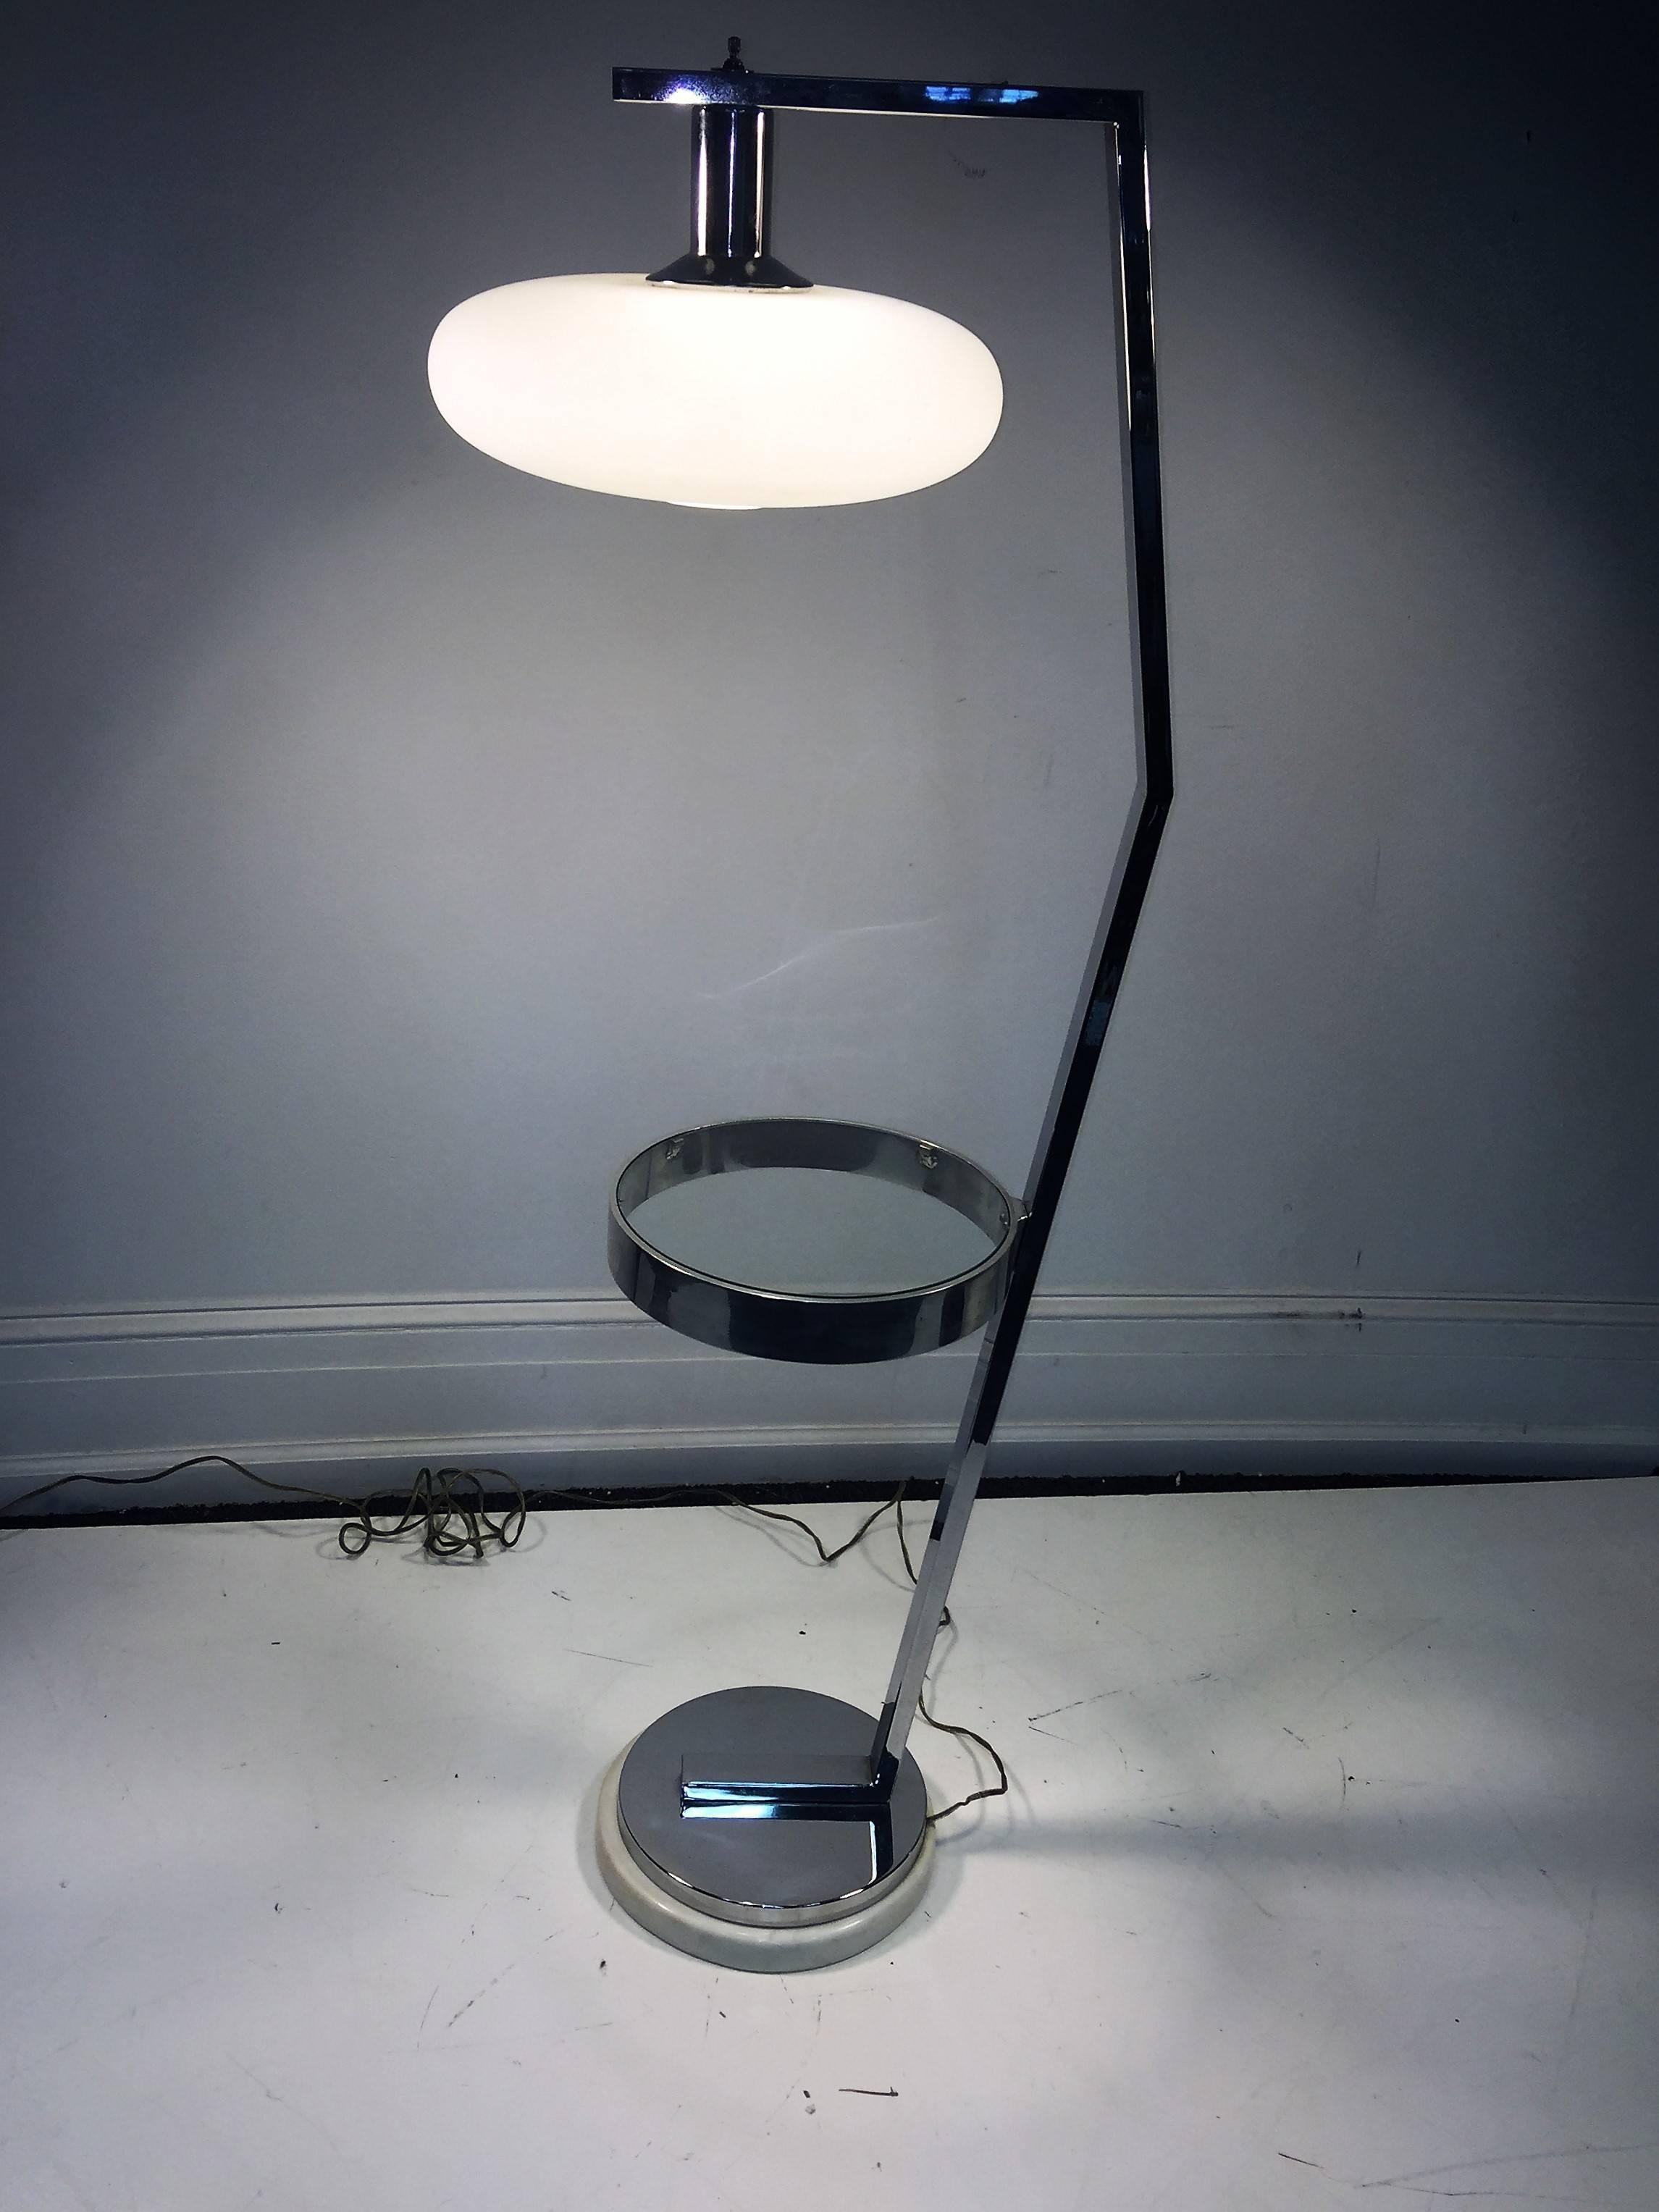  Fantastic Modernist Italian Marble & Chrome Cocktail Table Floor Lamp In Excellent Condition For Sale In Mount Penn, PA